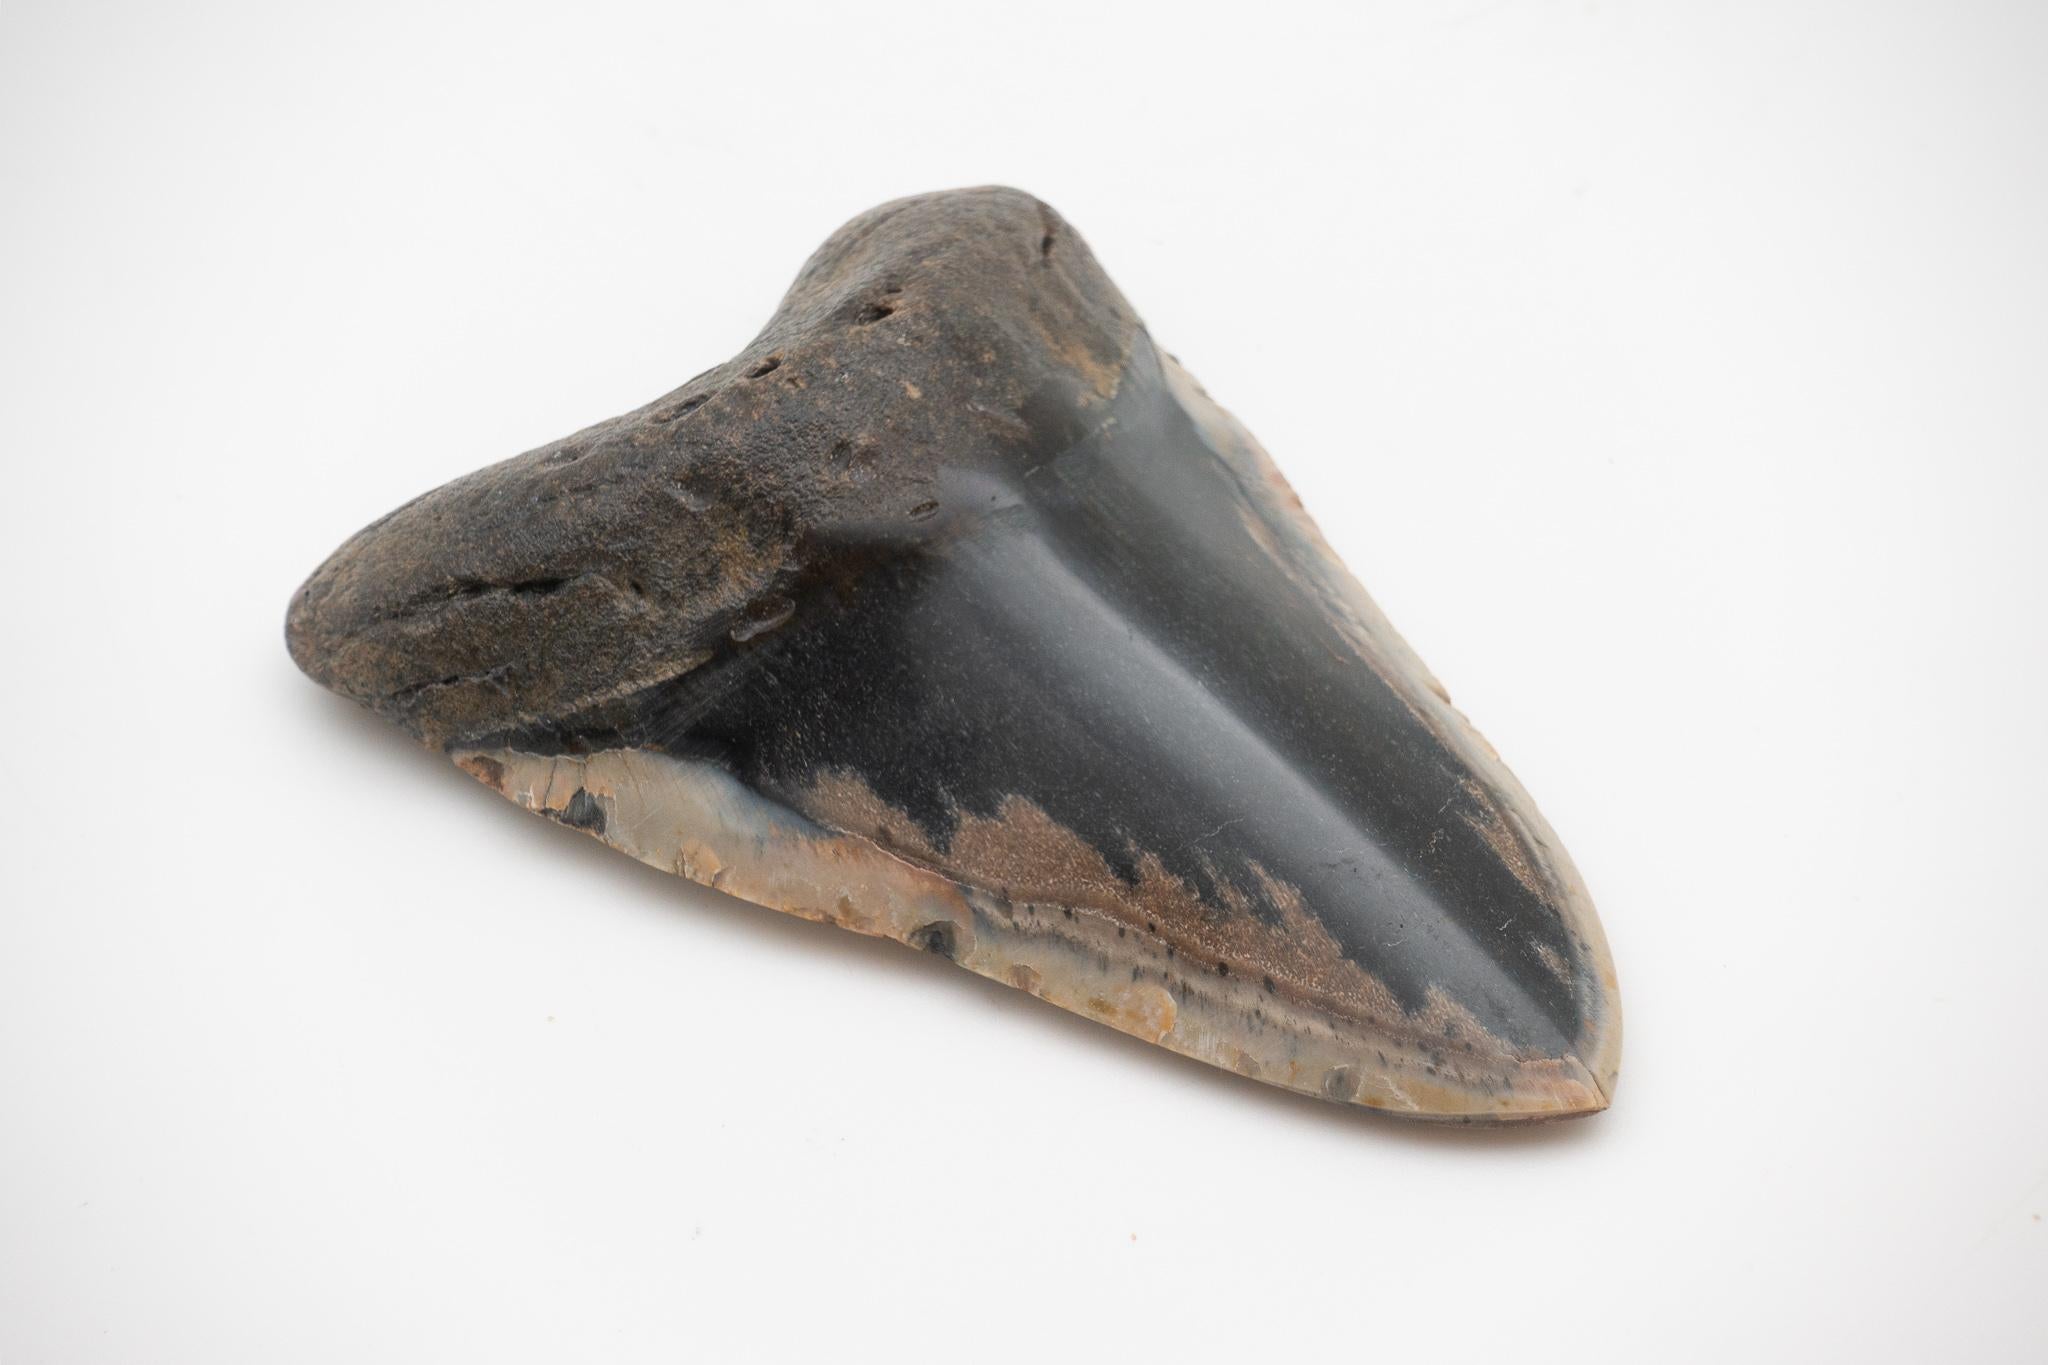 Large fossilized megalodon tooth found in the Gulf coast. The megalodon is an extinct species of shark that lived approximately 23 - 2.6 million years ago; regarded as one of the largest and most powerful predators to have ever lived, fossil remains